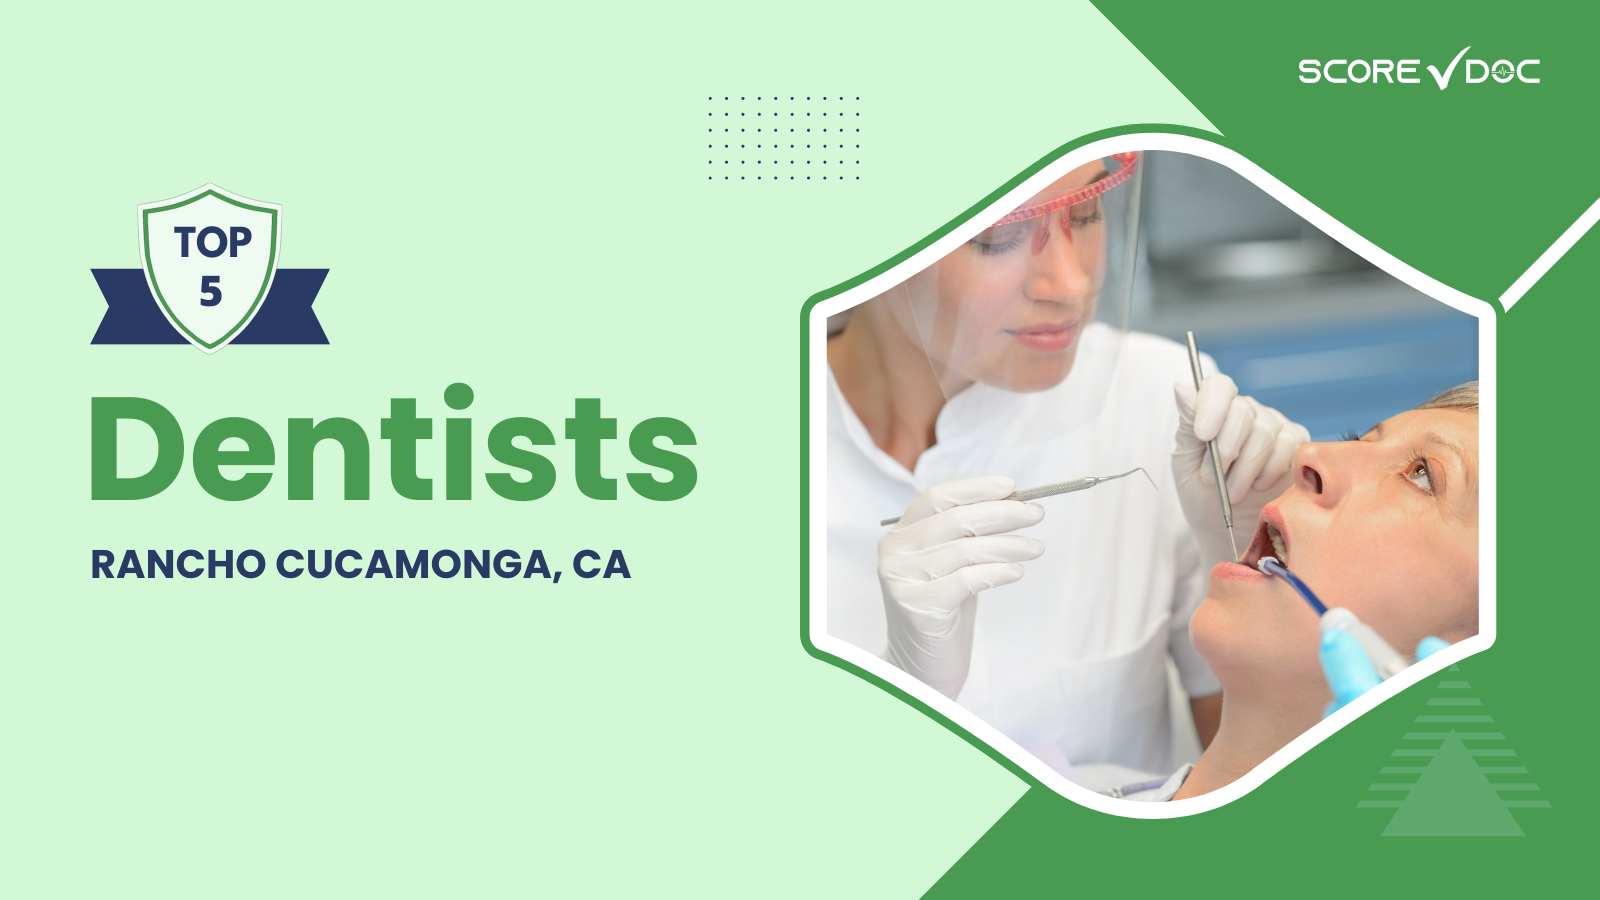 Top-Rated Dentists in Rancho Cucamonga, California